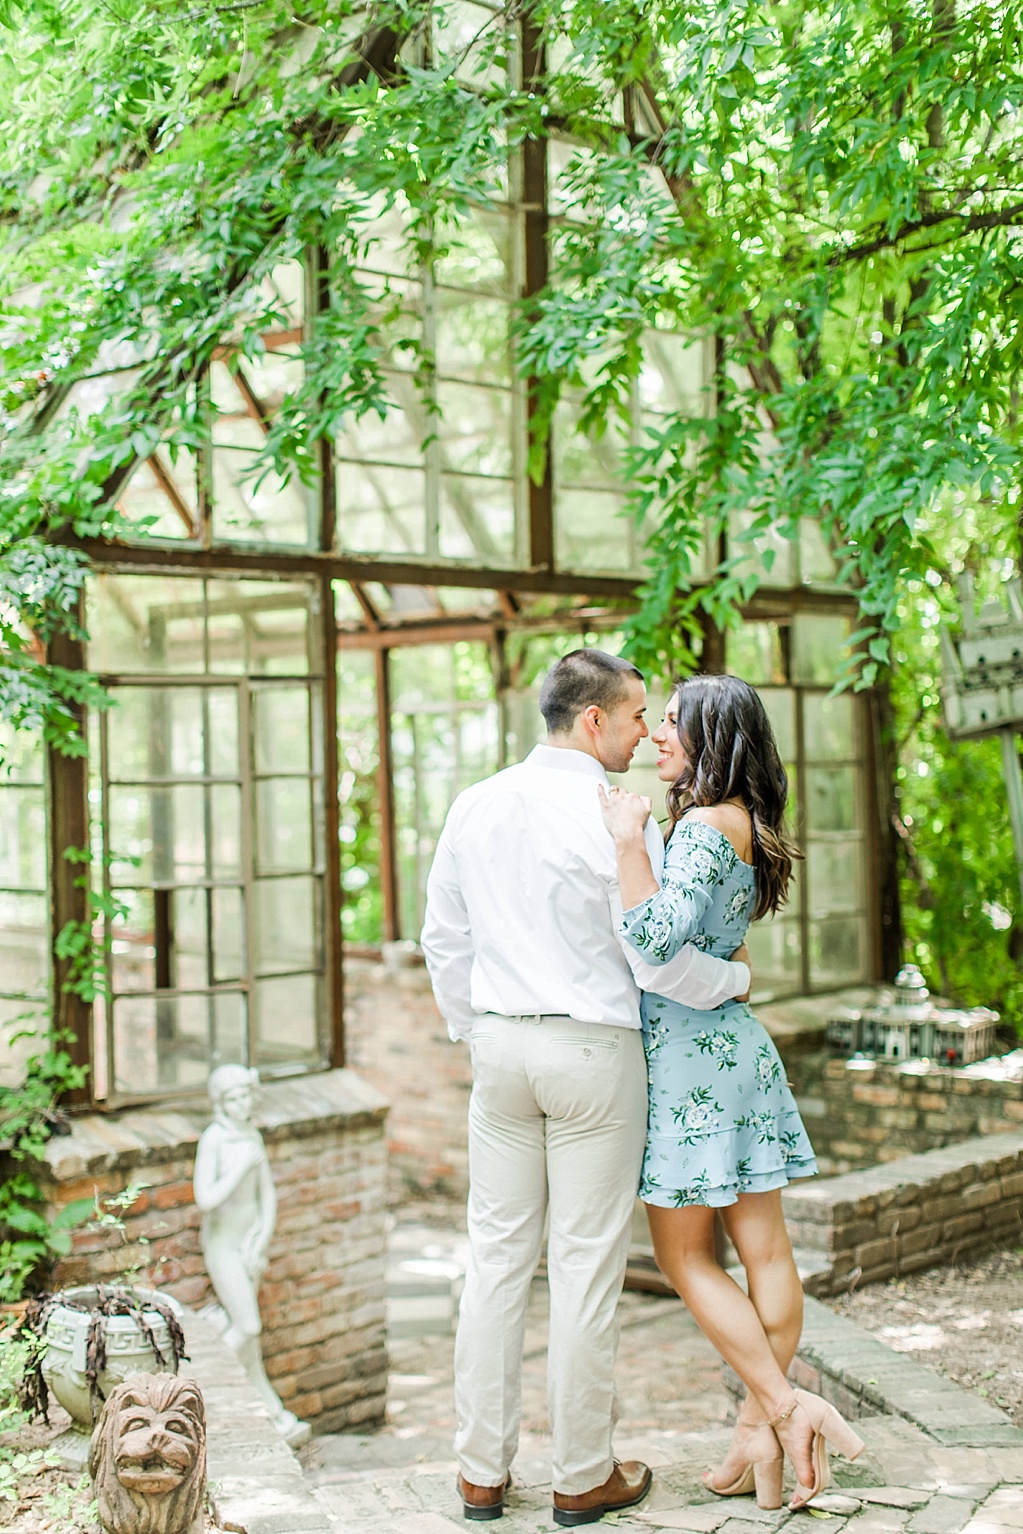 A Summer engagement Photo Session at Sekrit Theater in East Austin Texas By Allison Jeffers Wedding Photography 0022